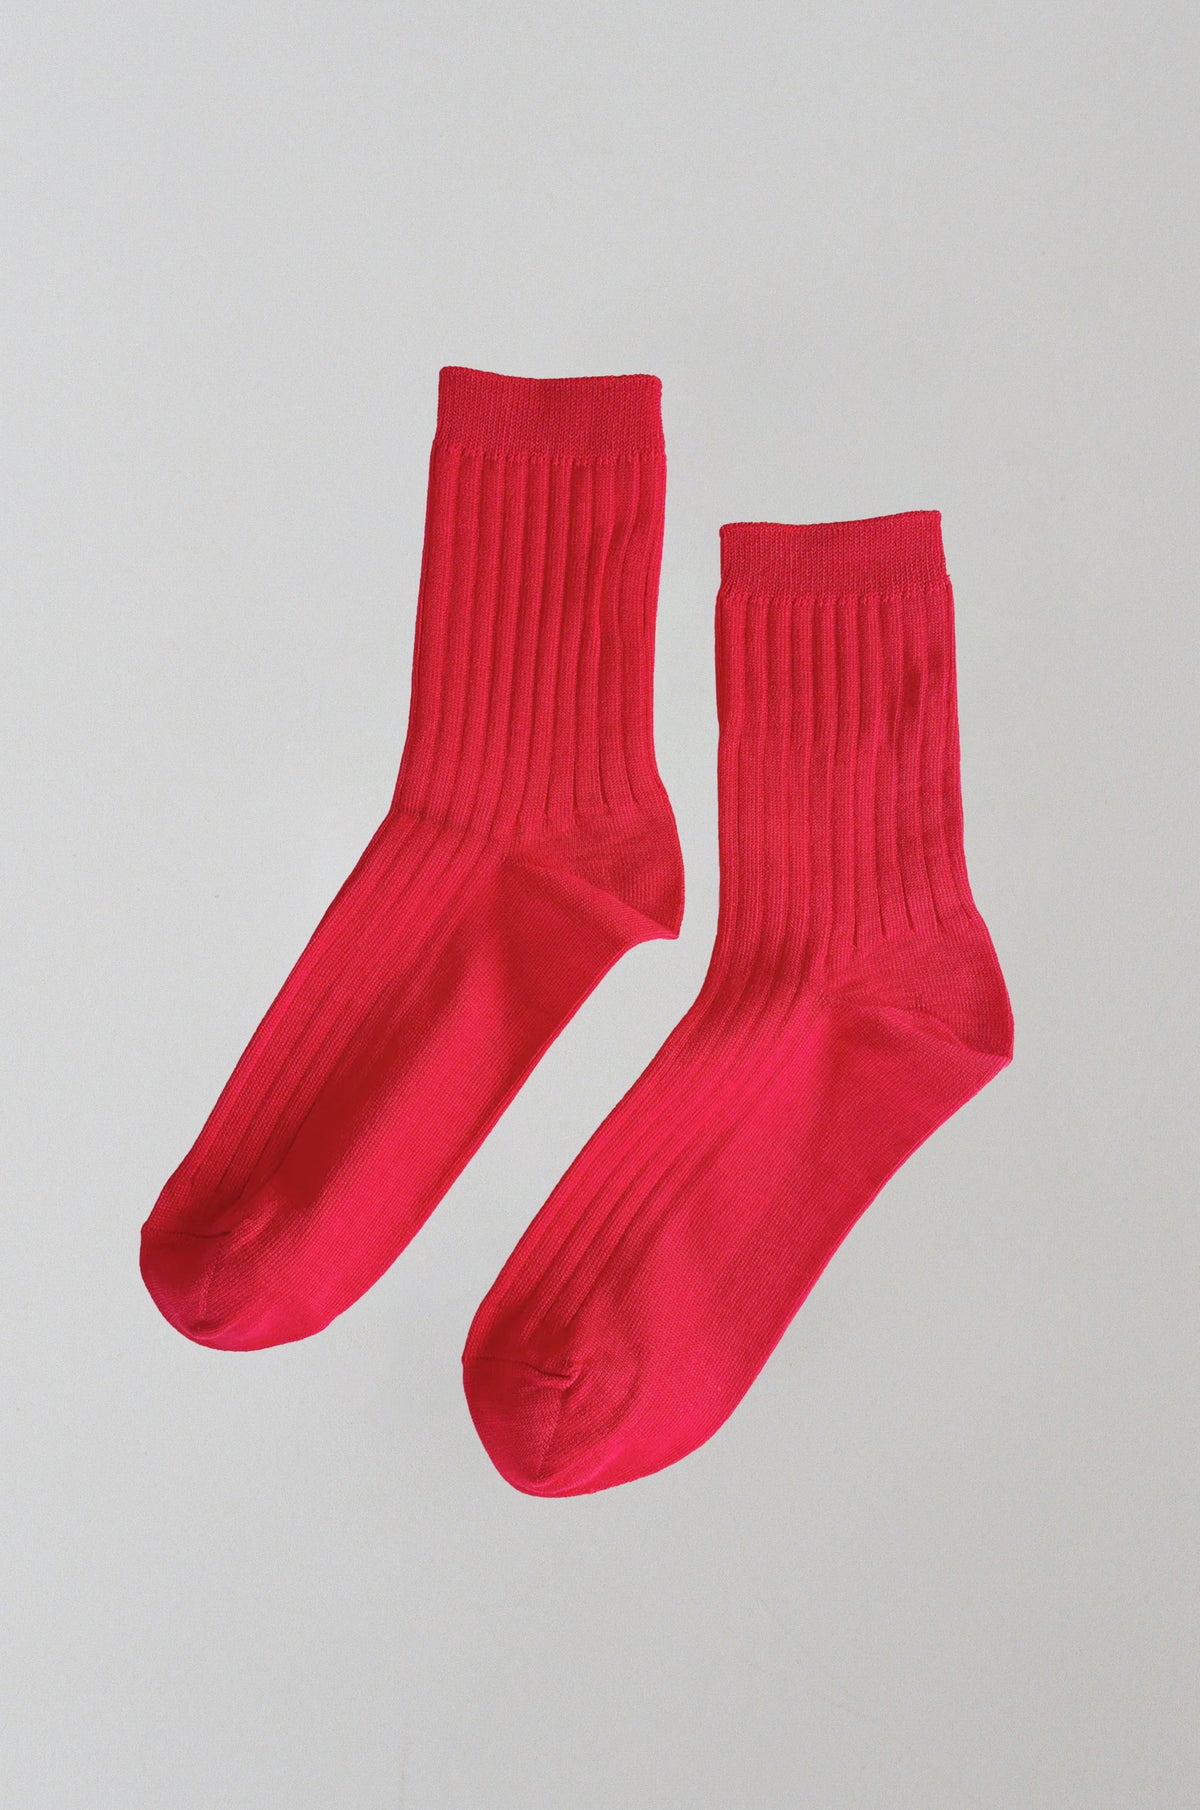 Her Socks - Classic Red - By Le Bon